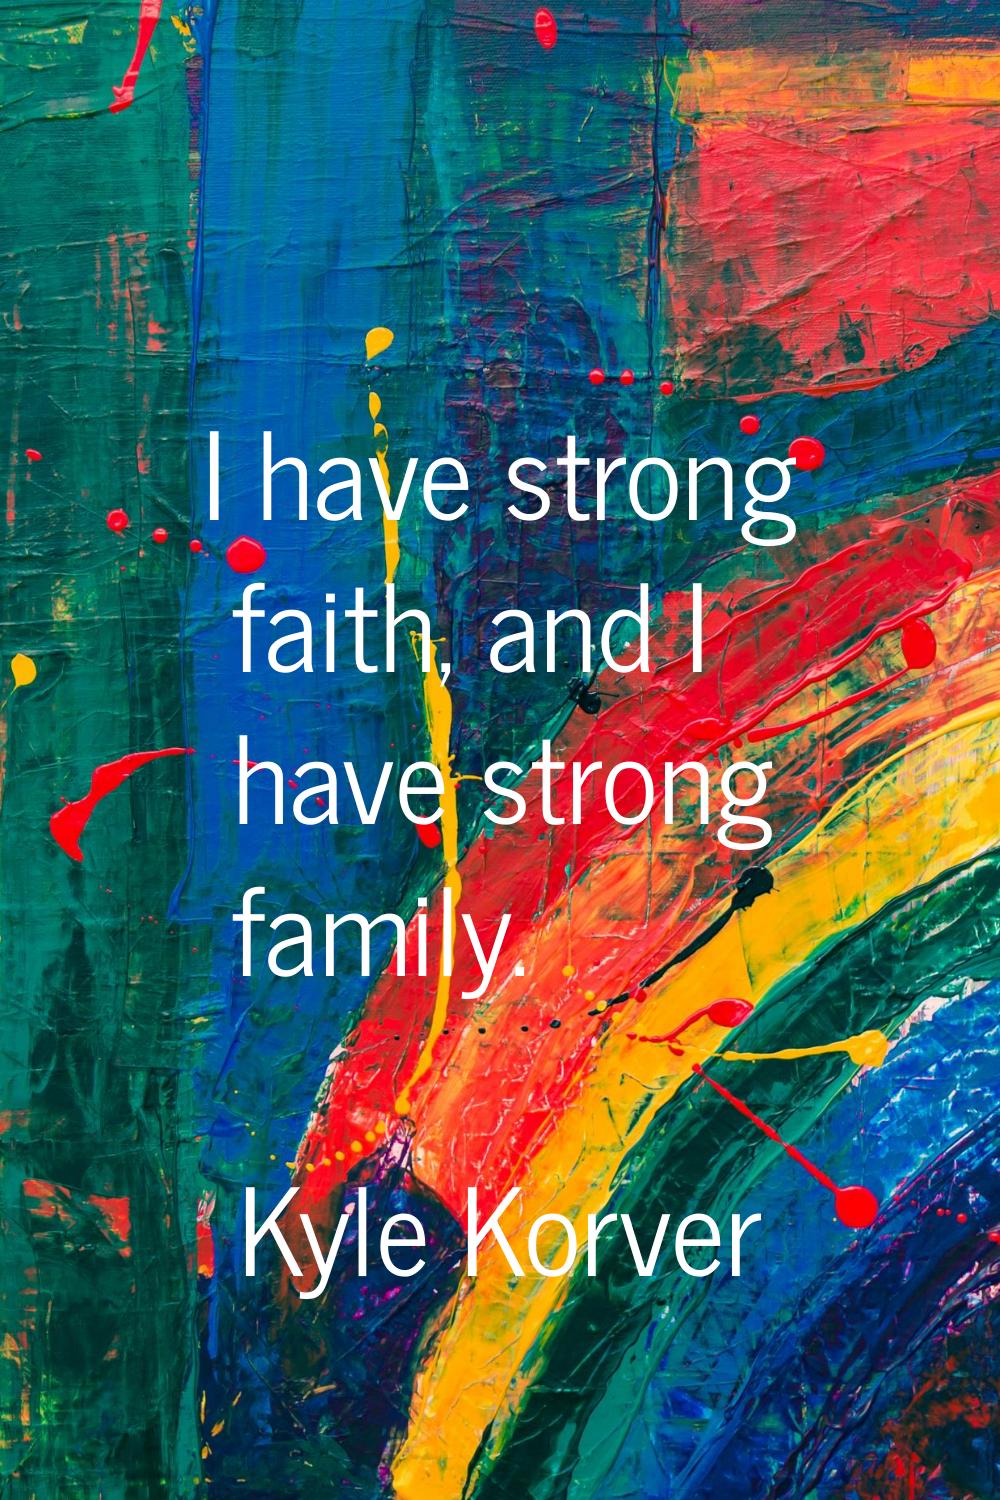 I have strong faith, and I have strong family.